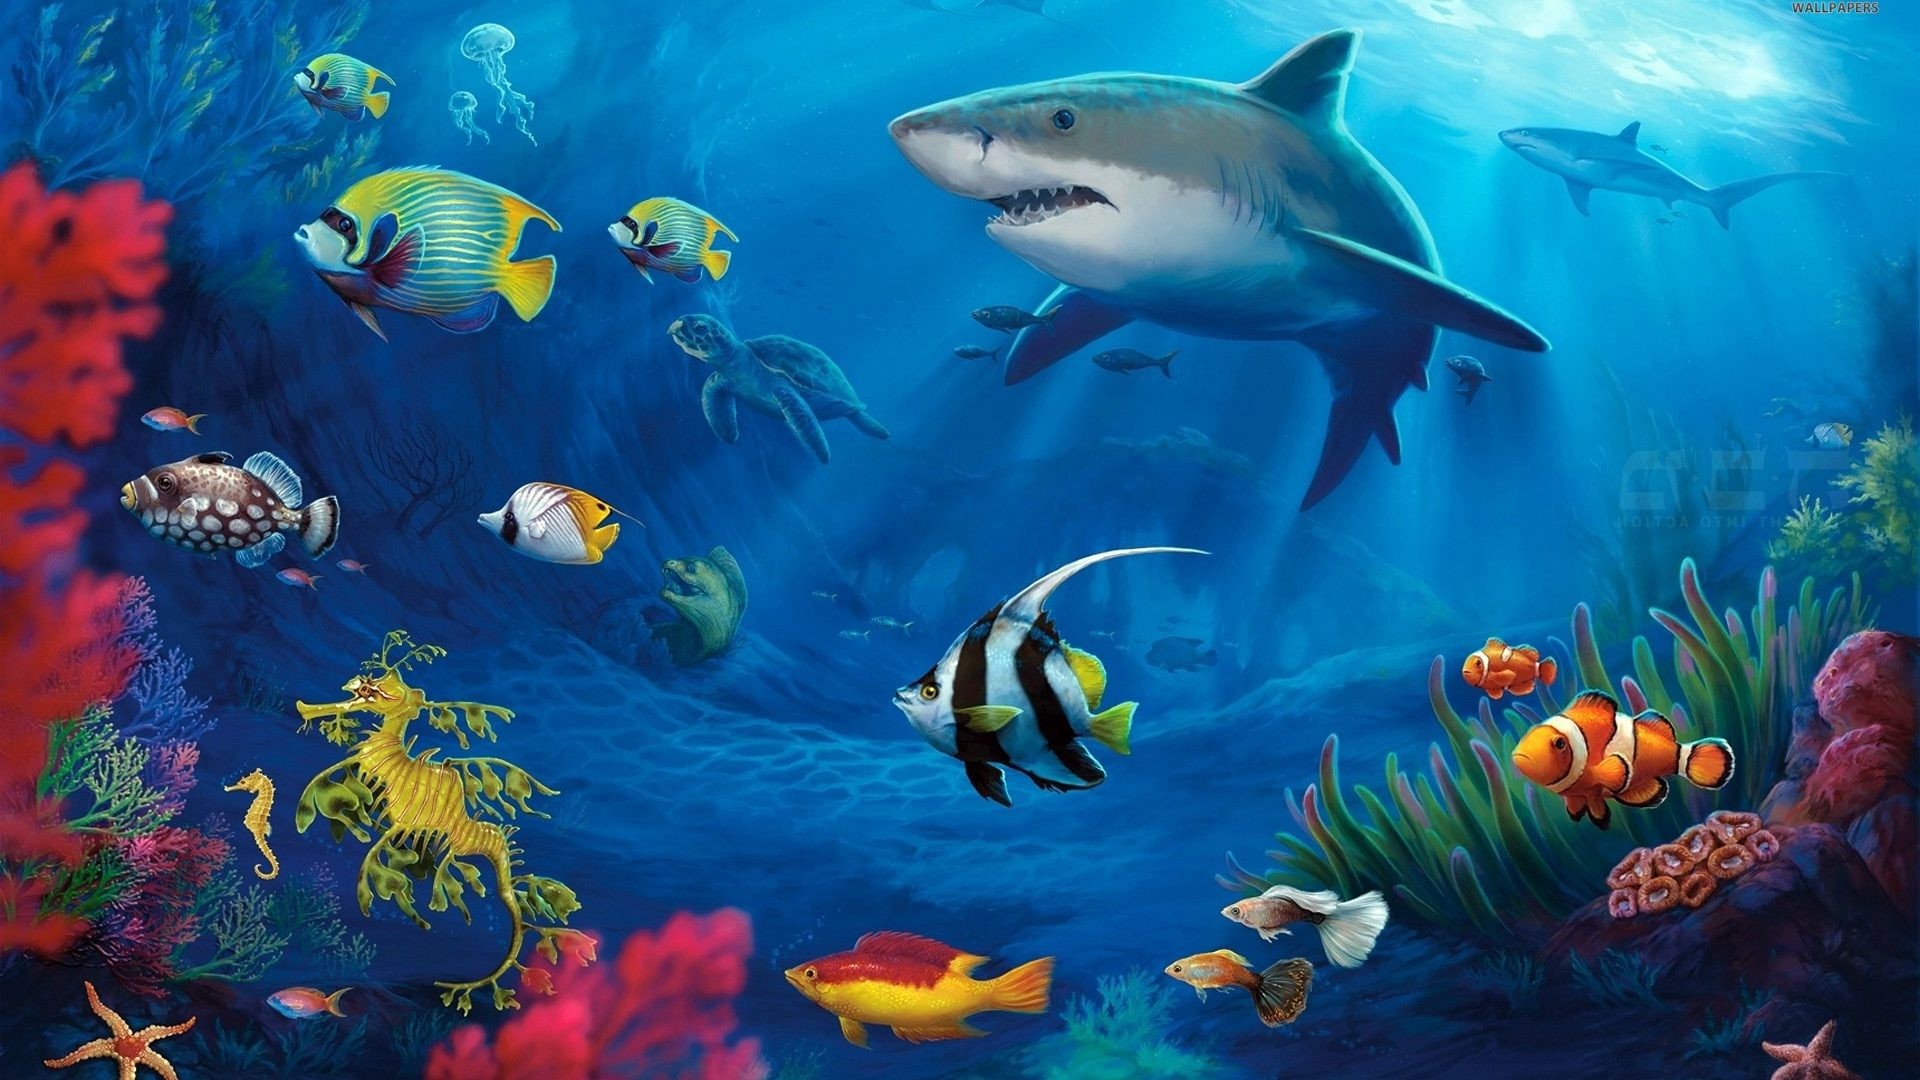 1920x1080 saltwater fish paintings - Google Search | Paint and wine class .